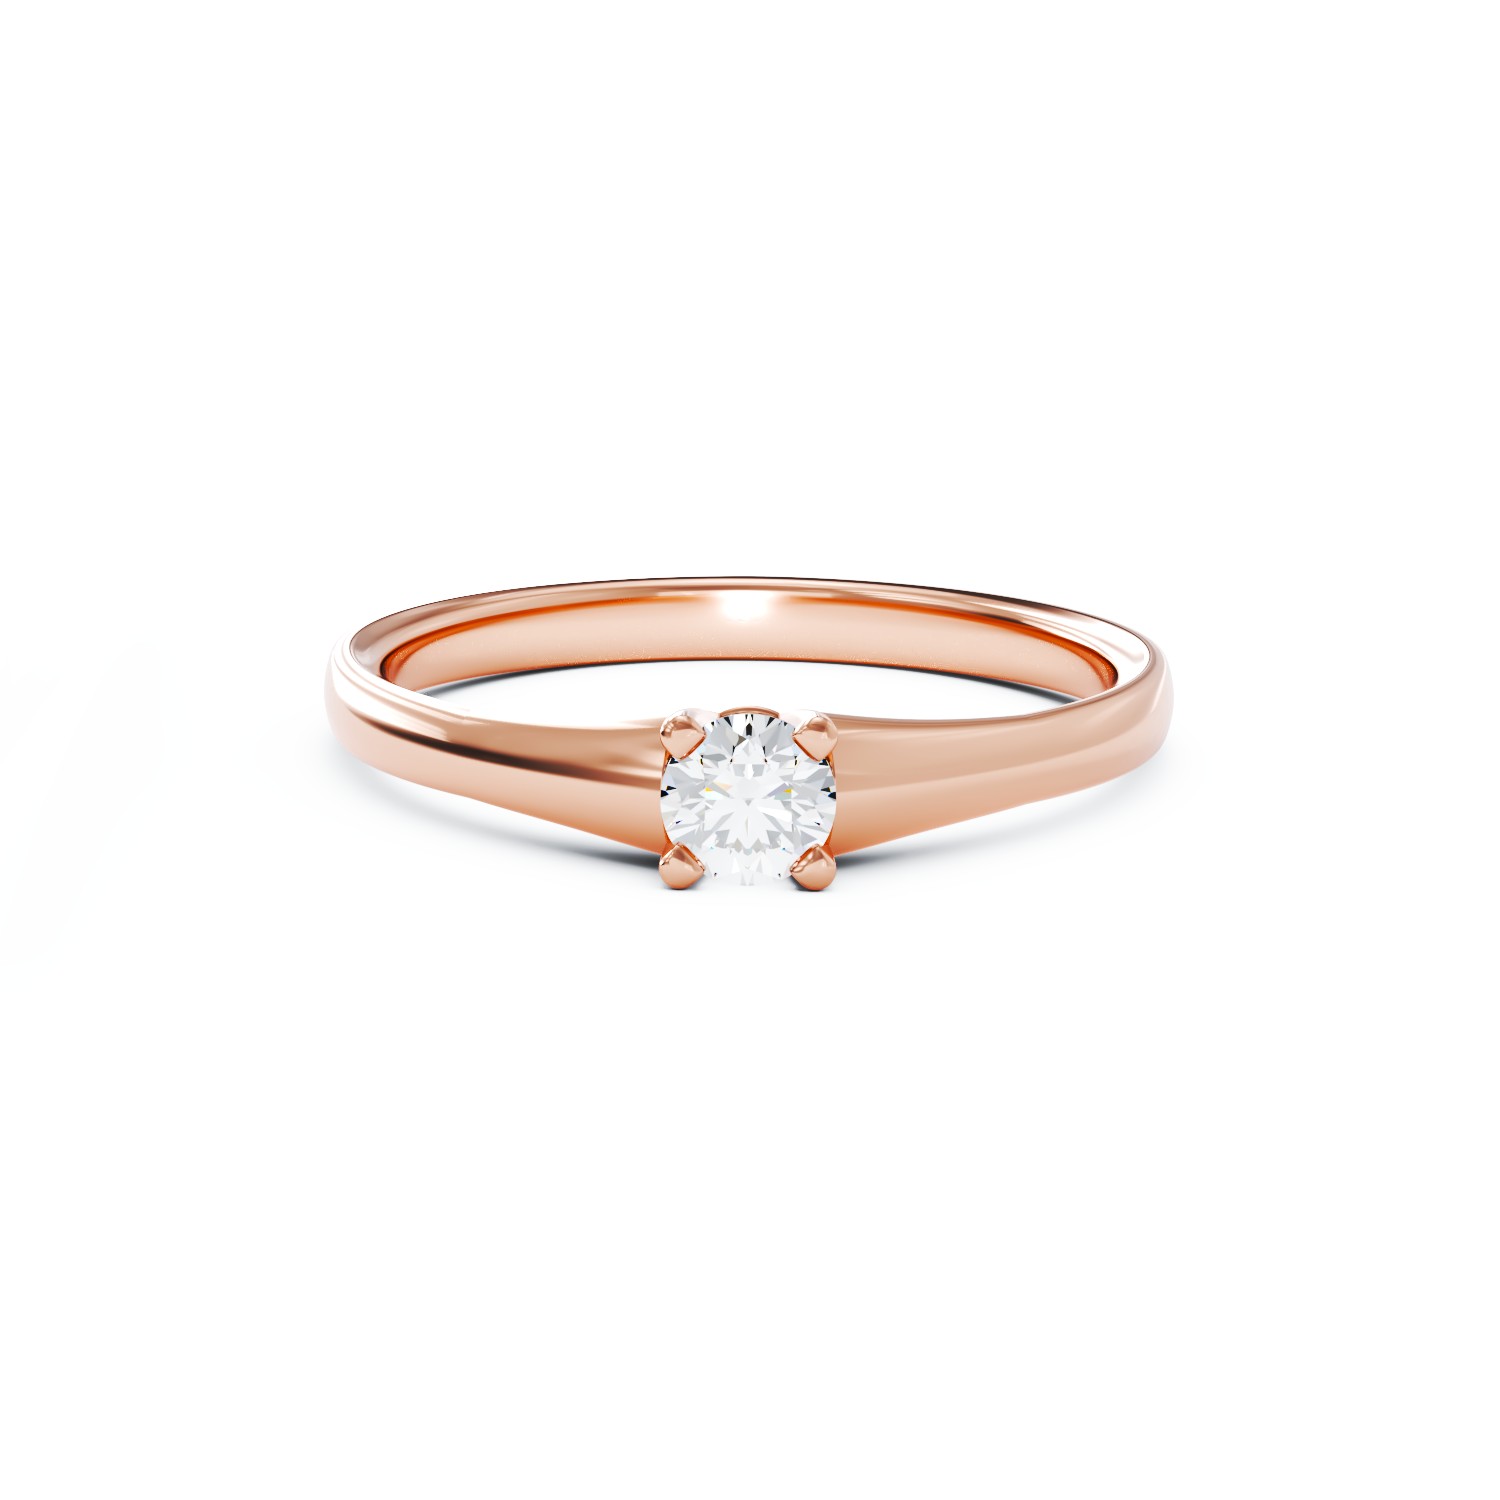 Rose gold engagement ring with 0.1ct solitaire diamond